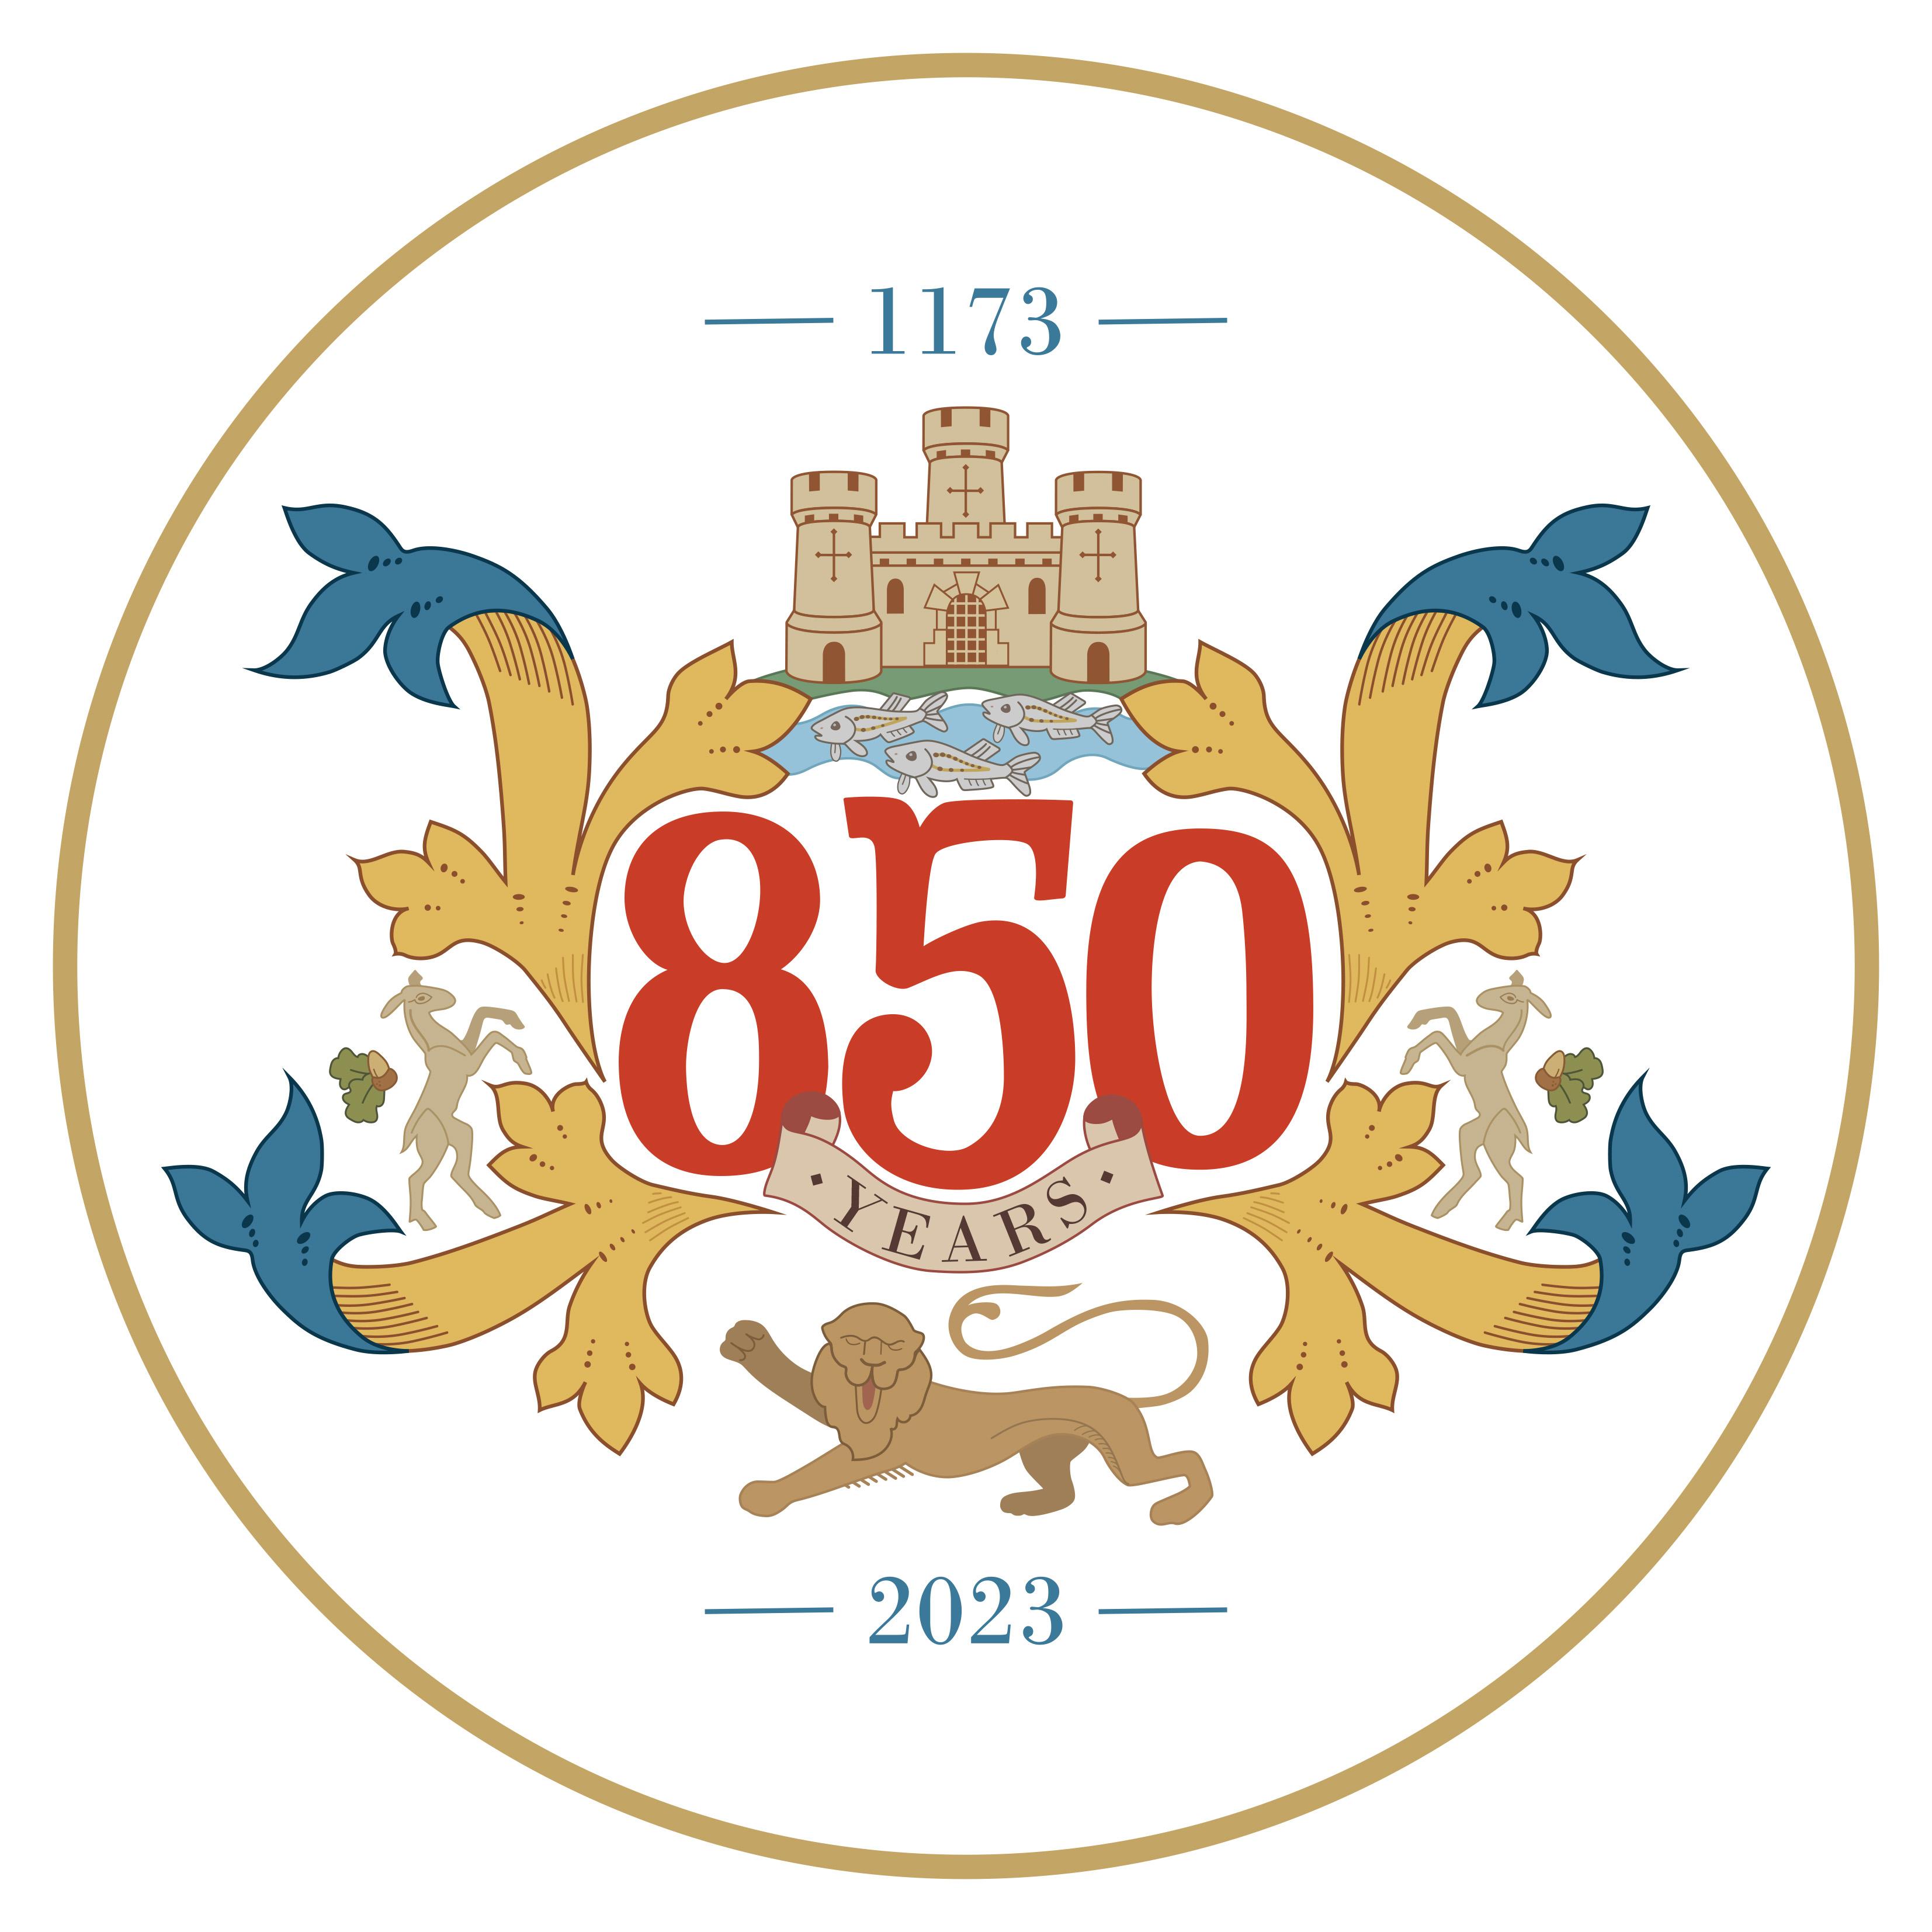 Newcastle-under-Lyme, 850th anniversary, celebrations, events, heritage